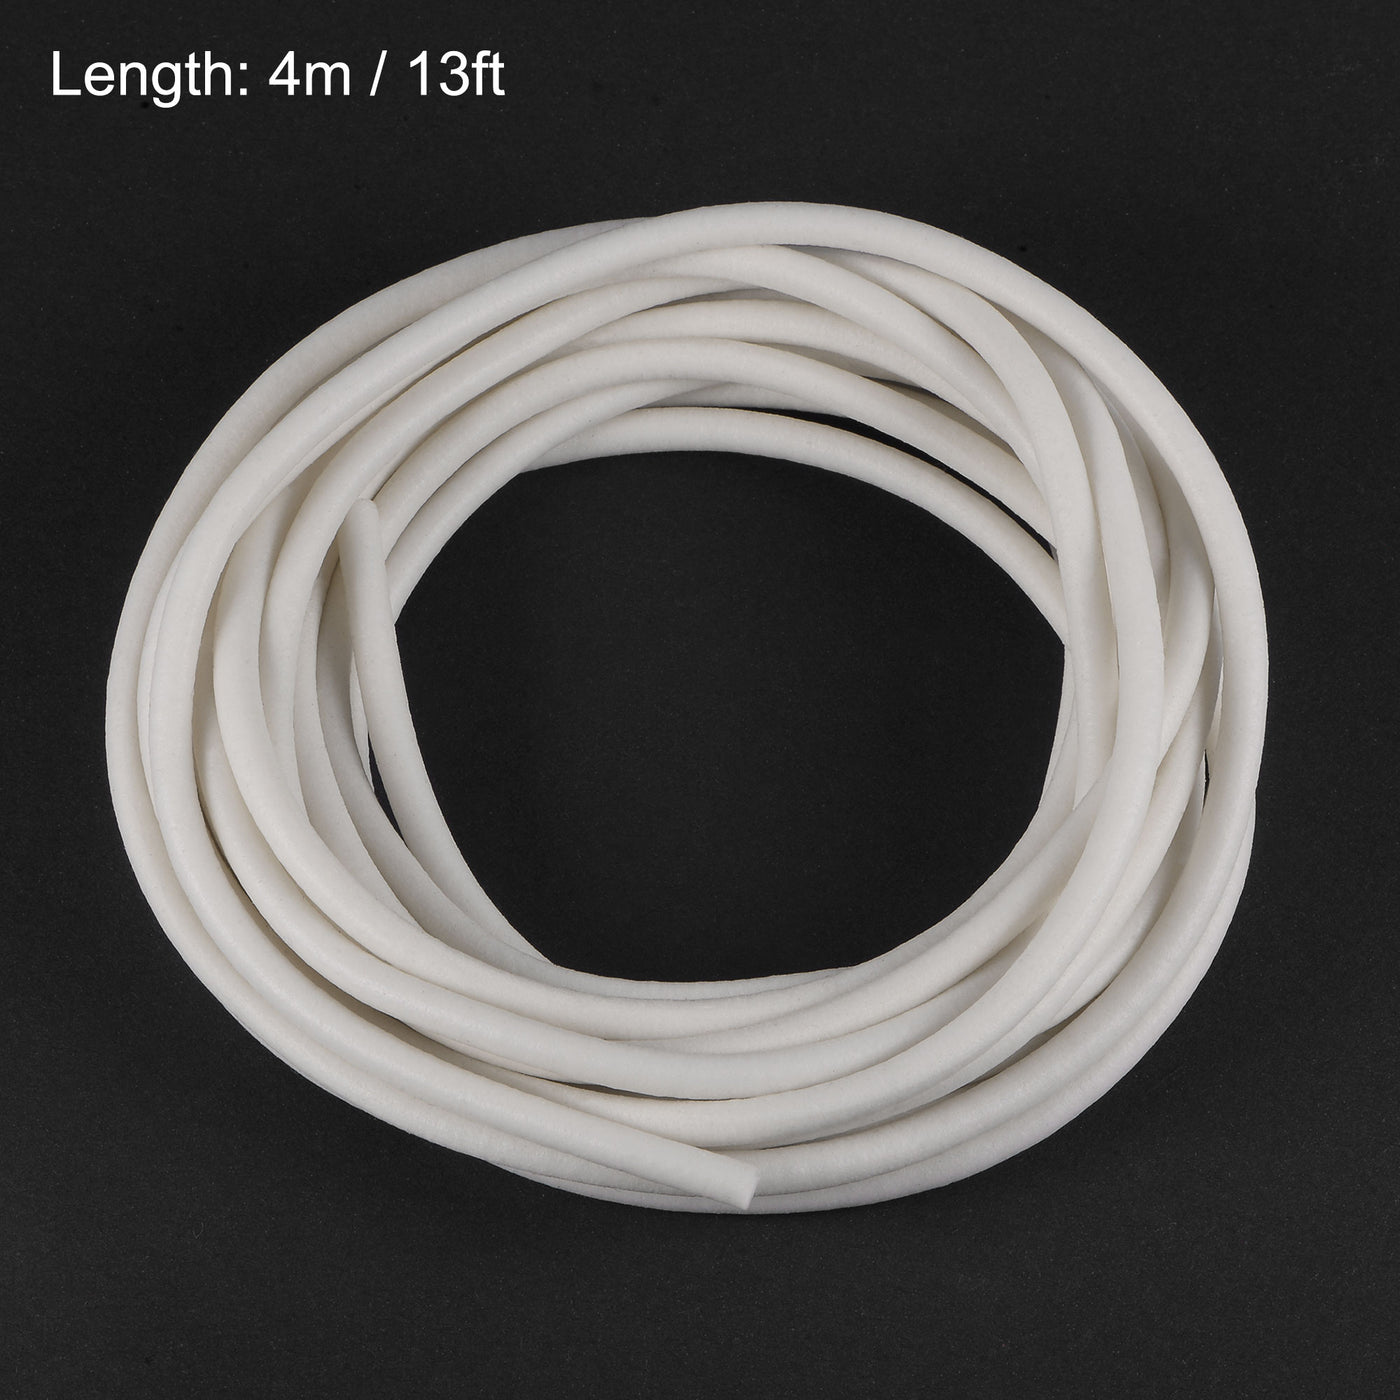 uxcell Uxcell 4mm Soft Silicone Bending Insert Tube for Rigid Tubing 13ft White